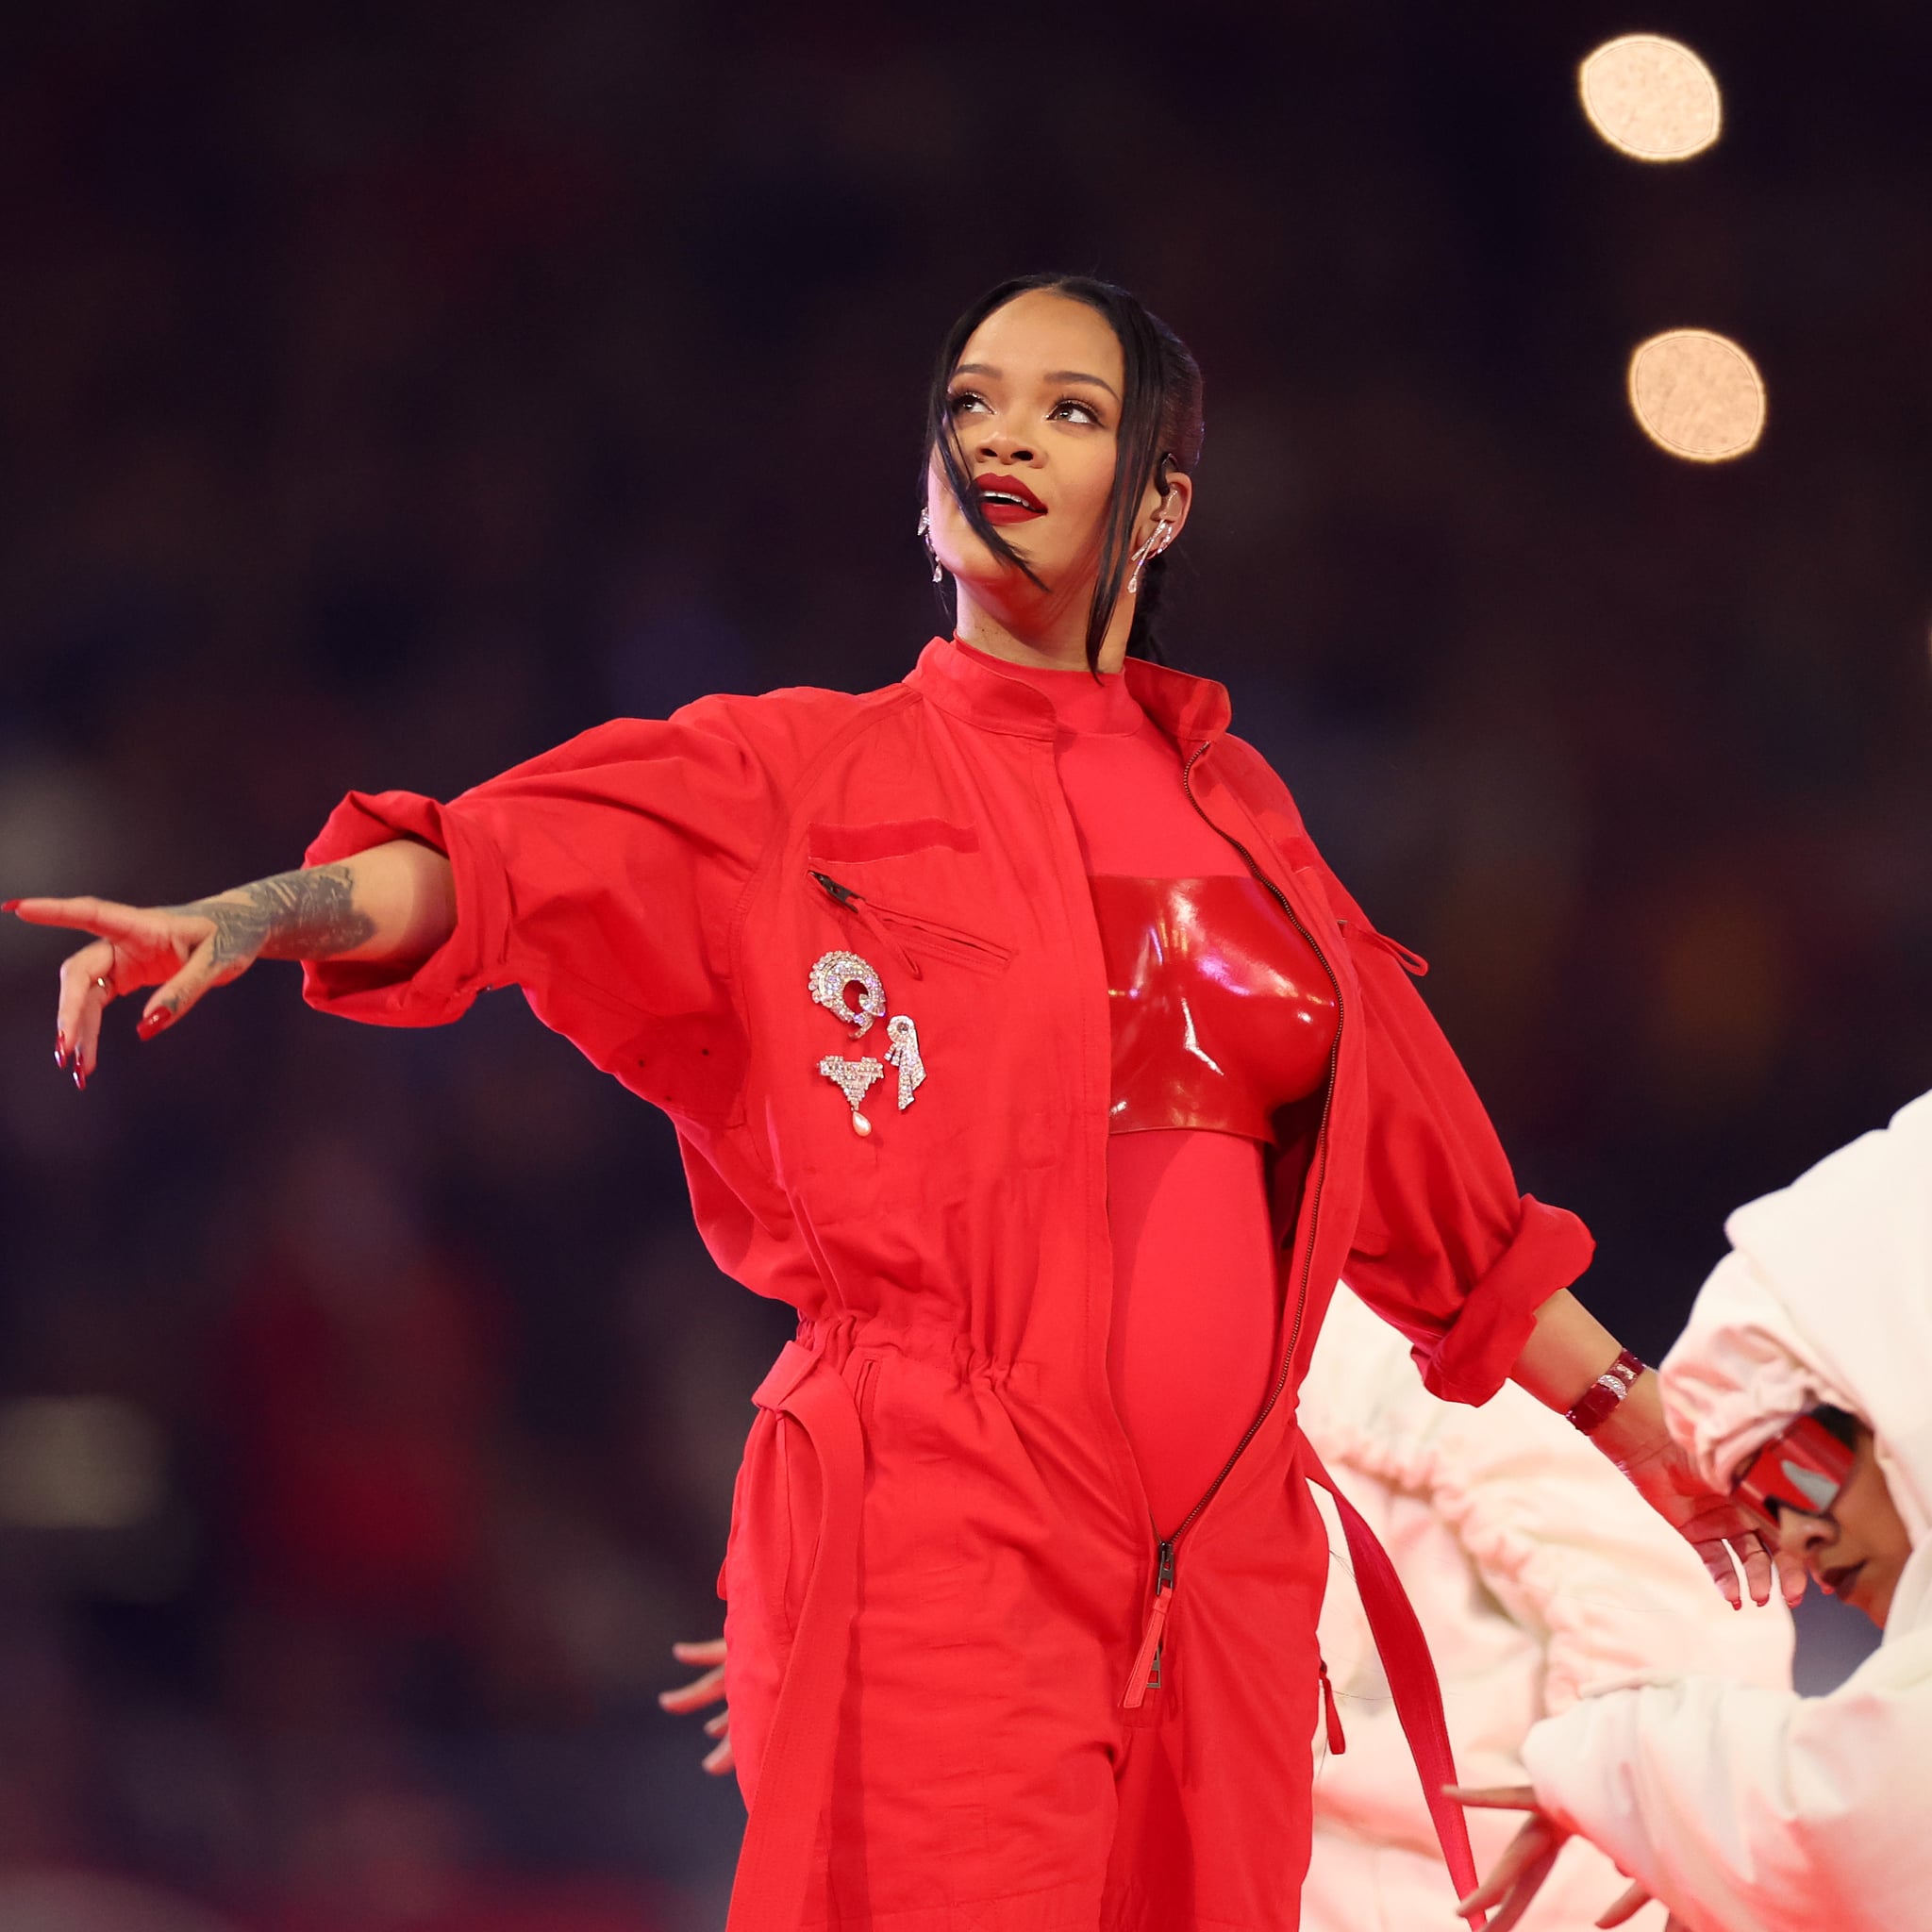 Rihanna's Red Jumpsuit at the Super Bowl Halftime Show